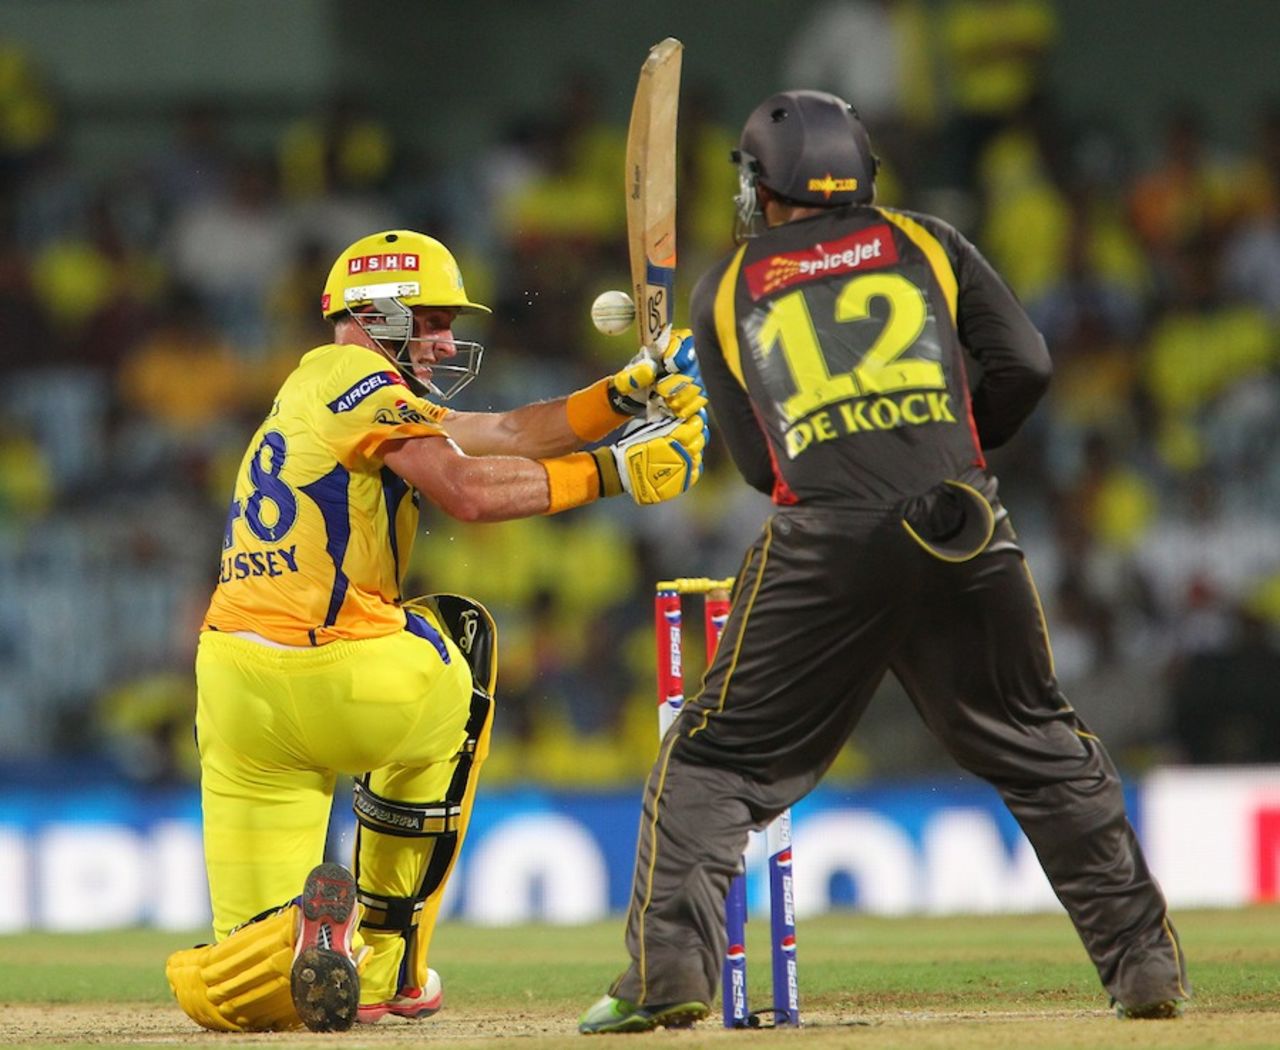 Michael Hussey was caught behind off the back of his bat, Chennai Super Kings v Sunrisers Hyderabad, IPL, Chennai, April 25, 2013